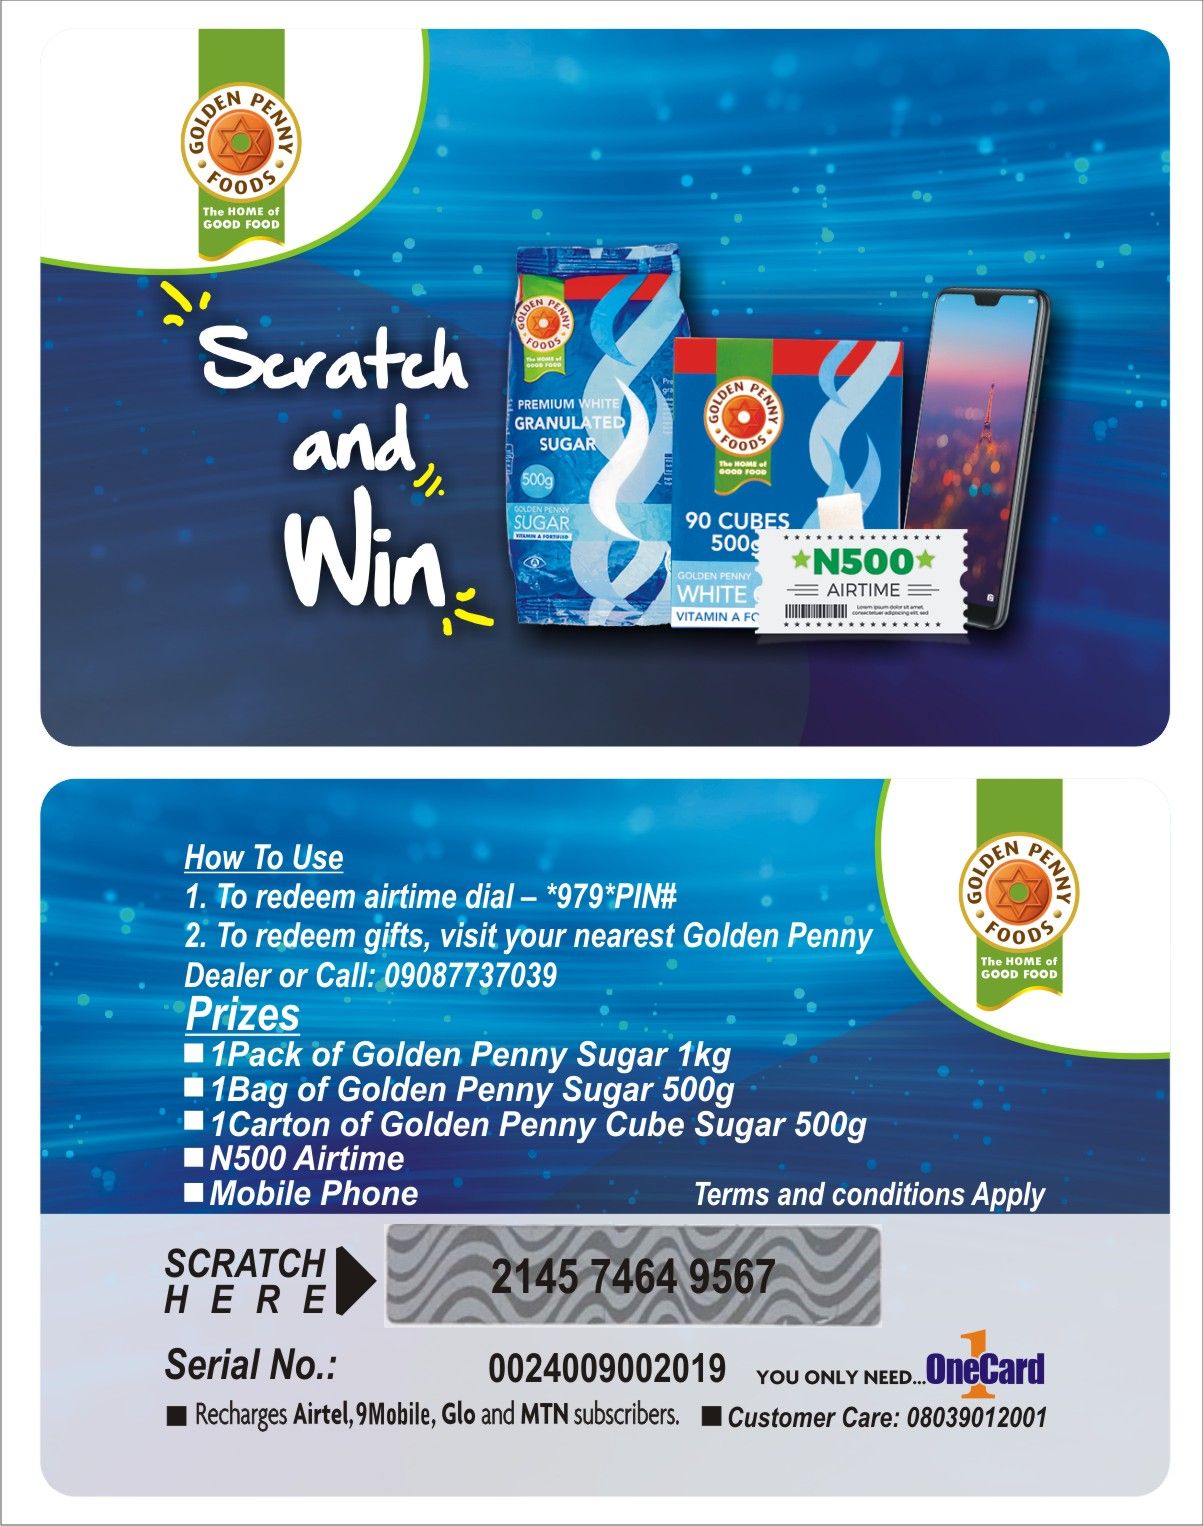 CALL CHINEDU ON 08179651585 TO PROMOTE YOUR PRODUCTS USING SCRATCH AND WIN PROMO